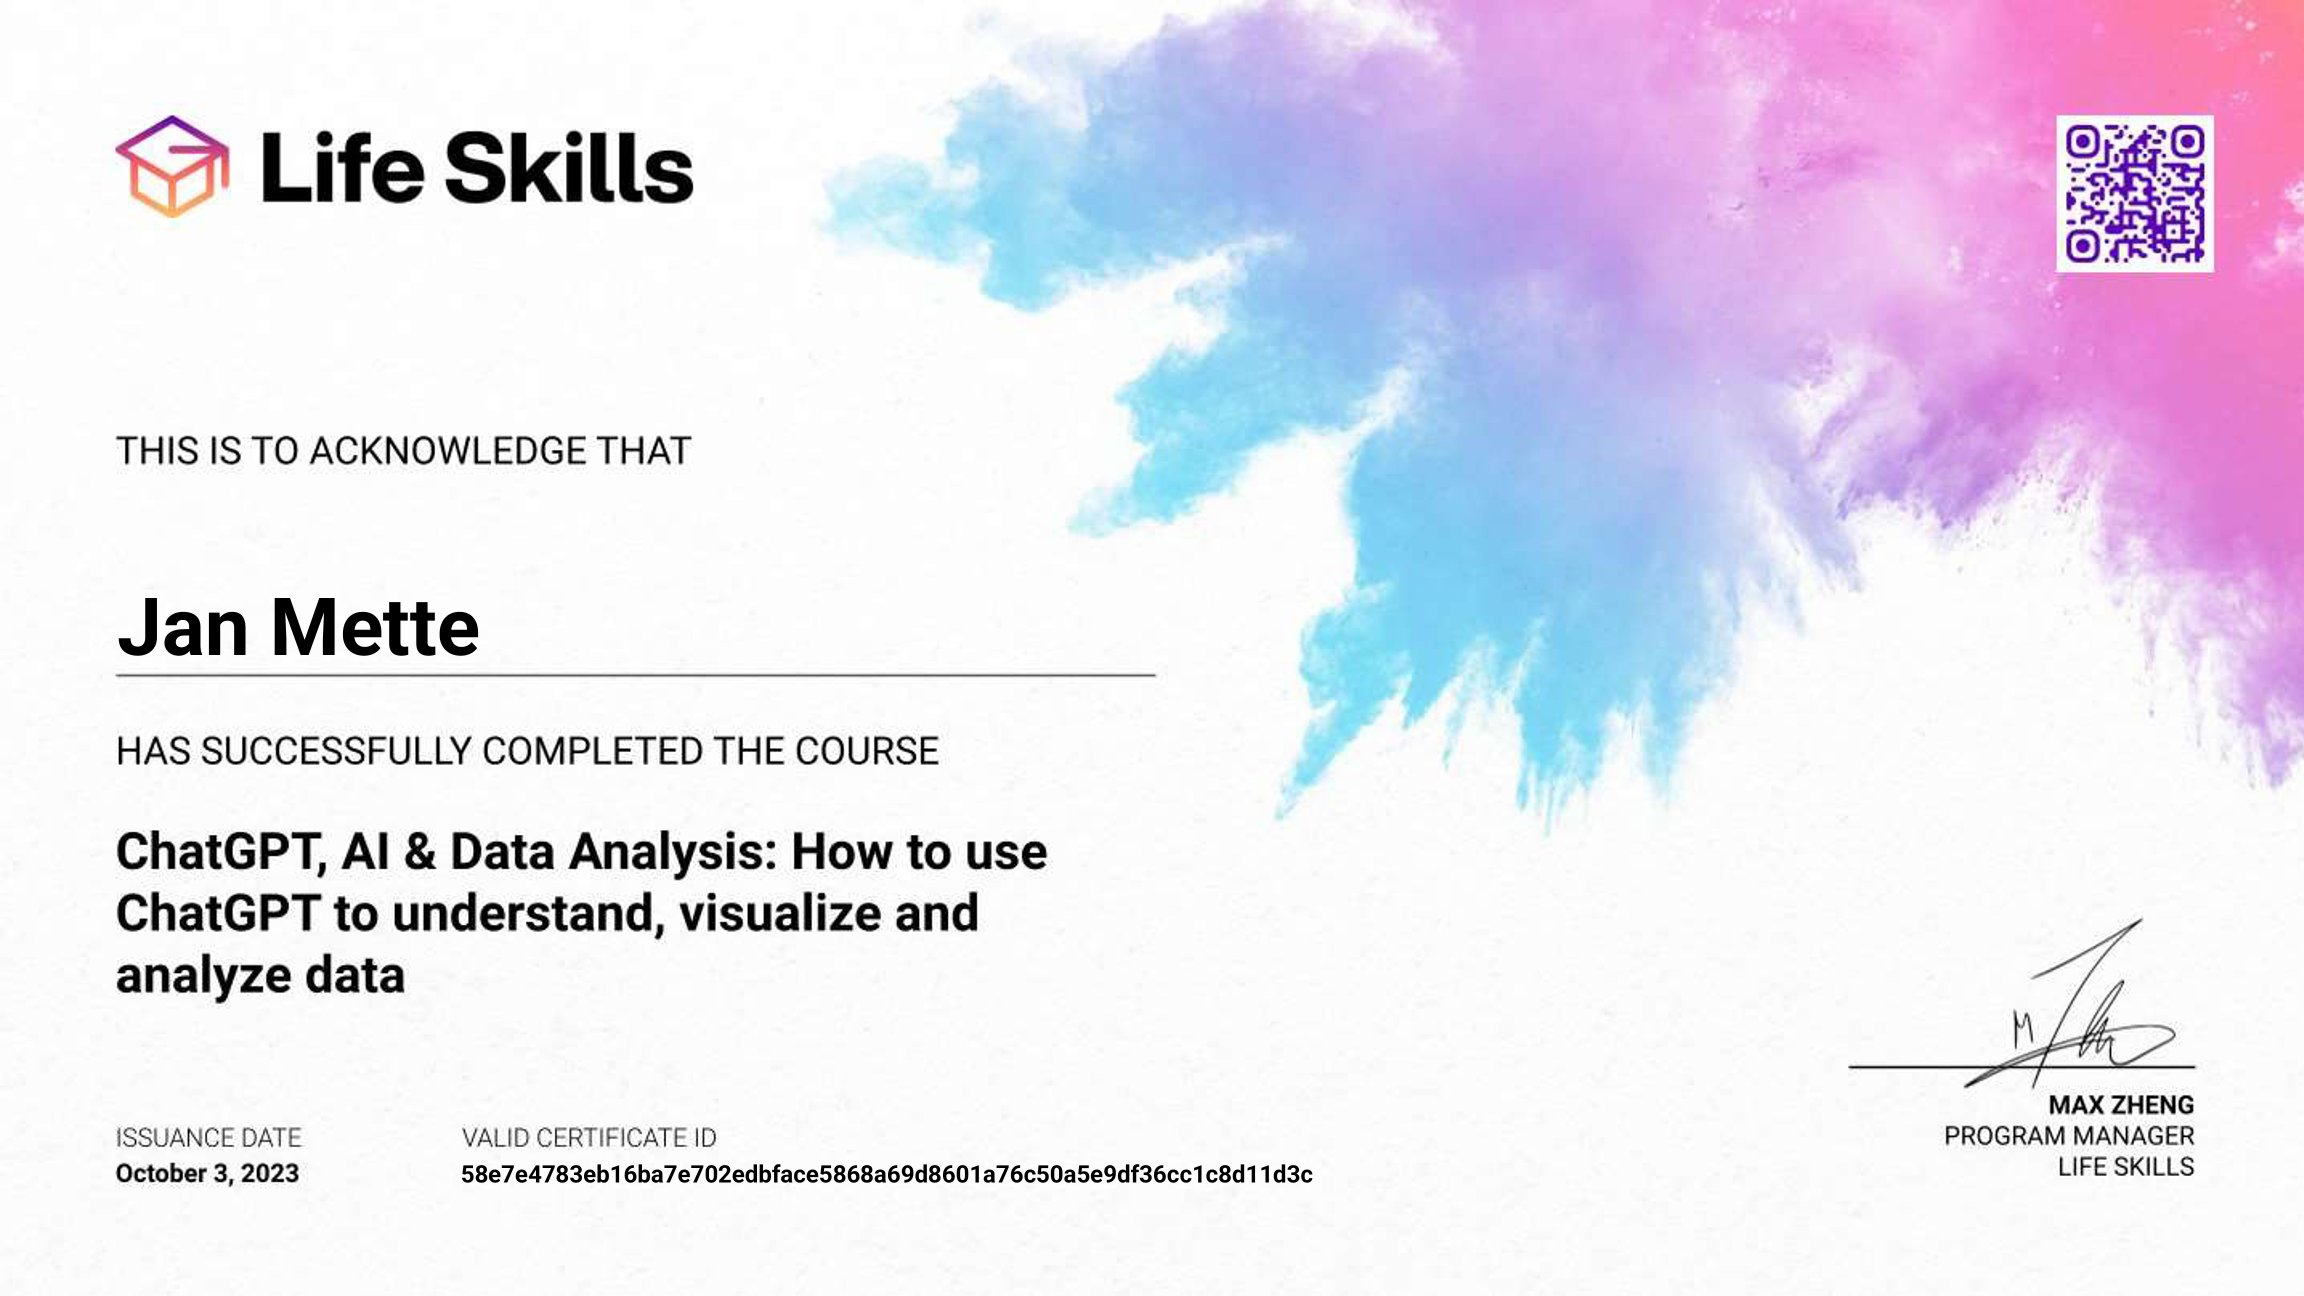 Life Skills - ChatGPT, AI & Data Analysis How to use ChatGPT to understand, visualize and analyze data - Jan Mette - Certificate